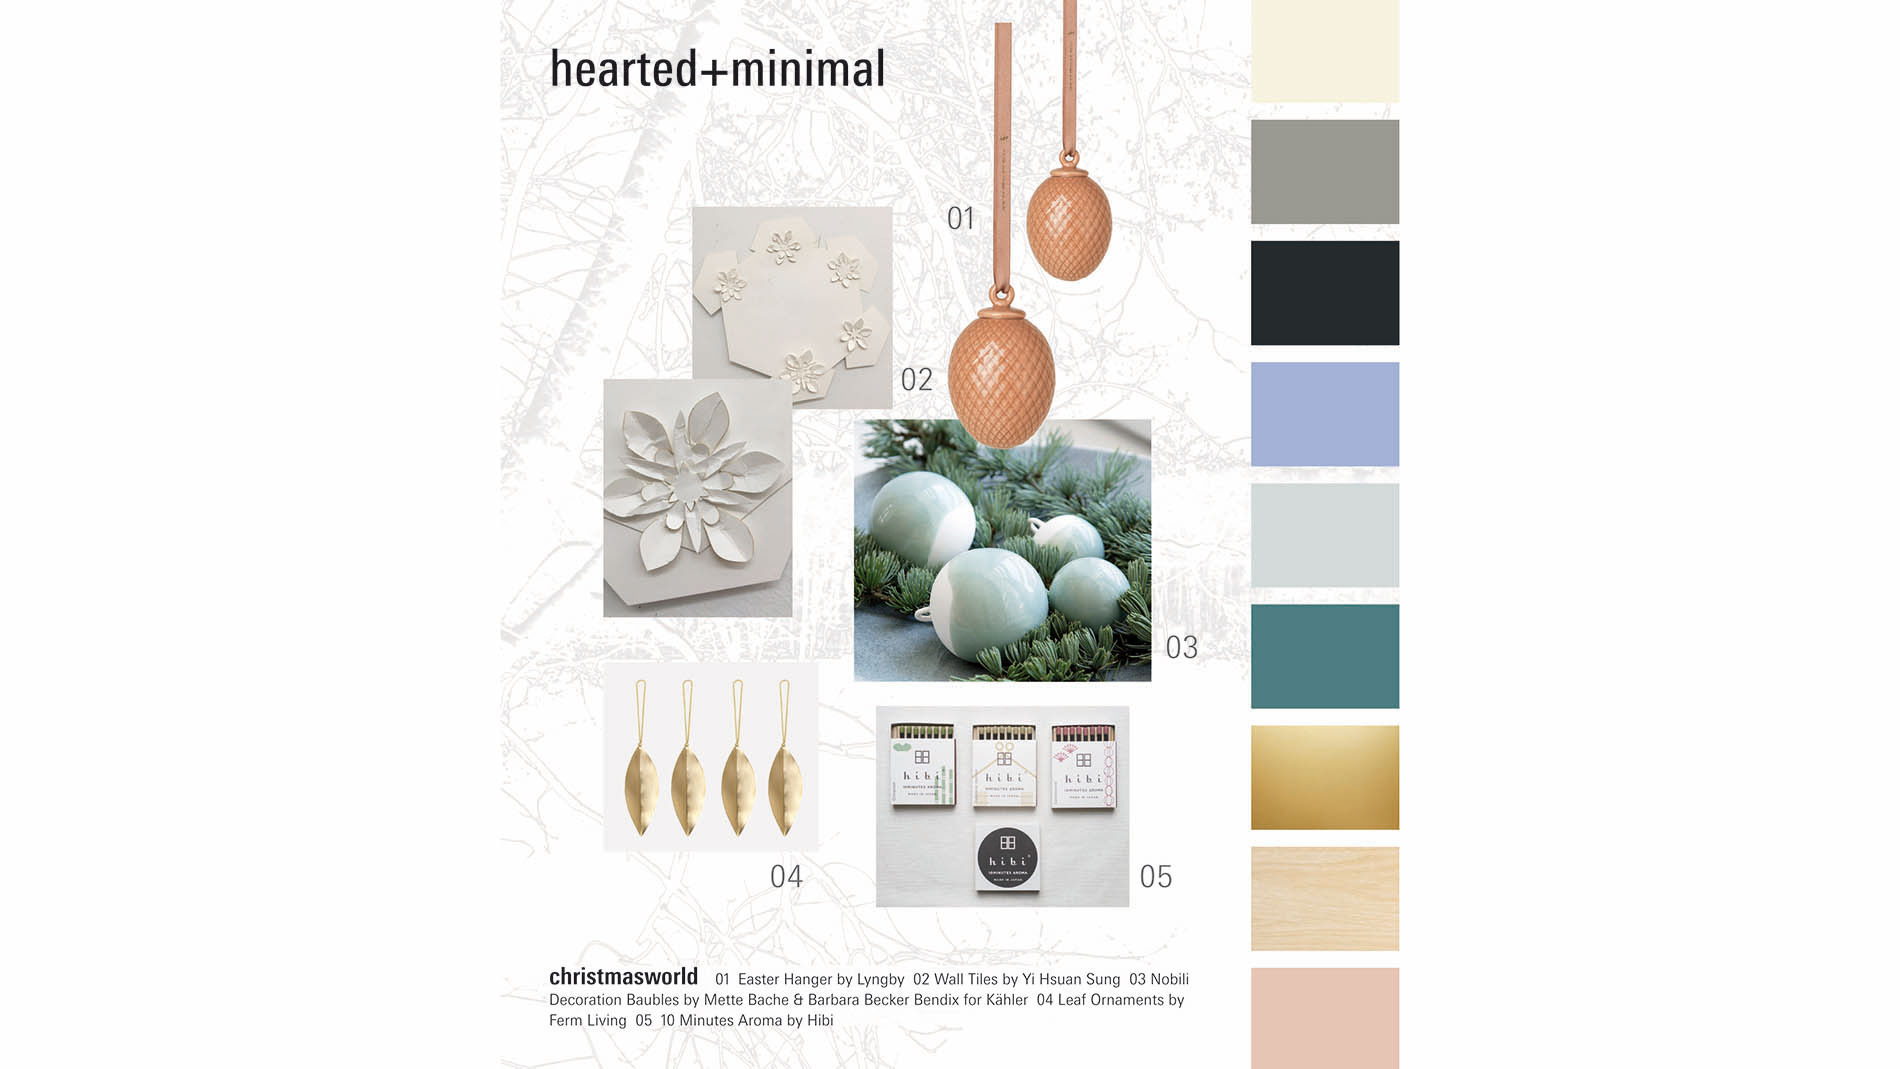 hearted + minimal brings natural materials to the fore with light colours and fine products. Image: Messe Frankfurt.